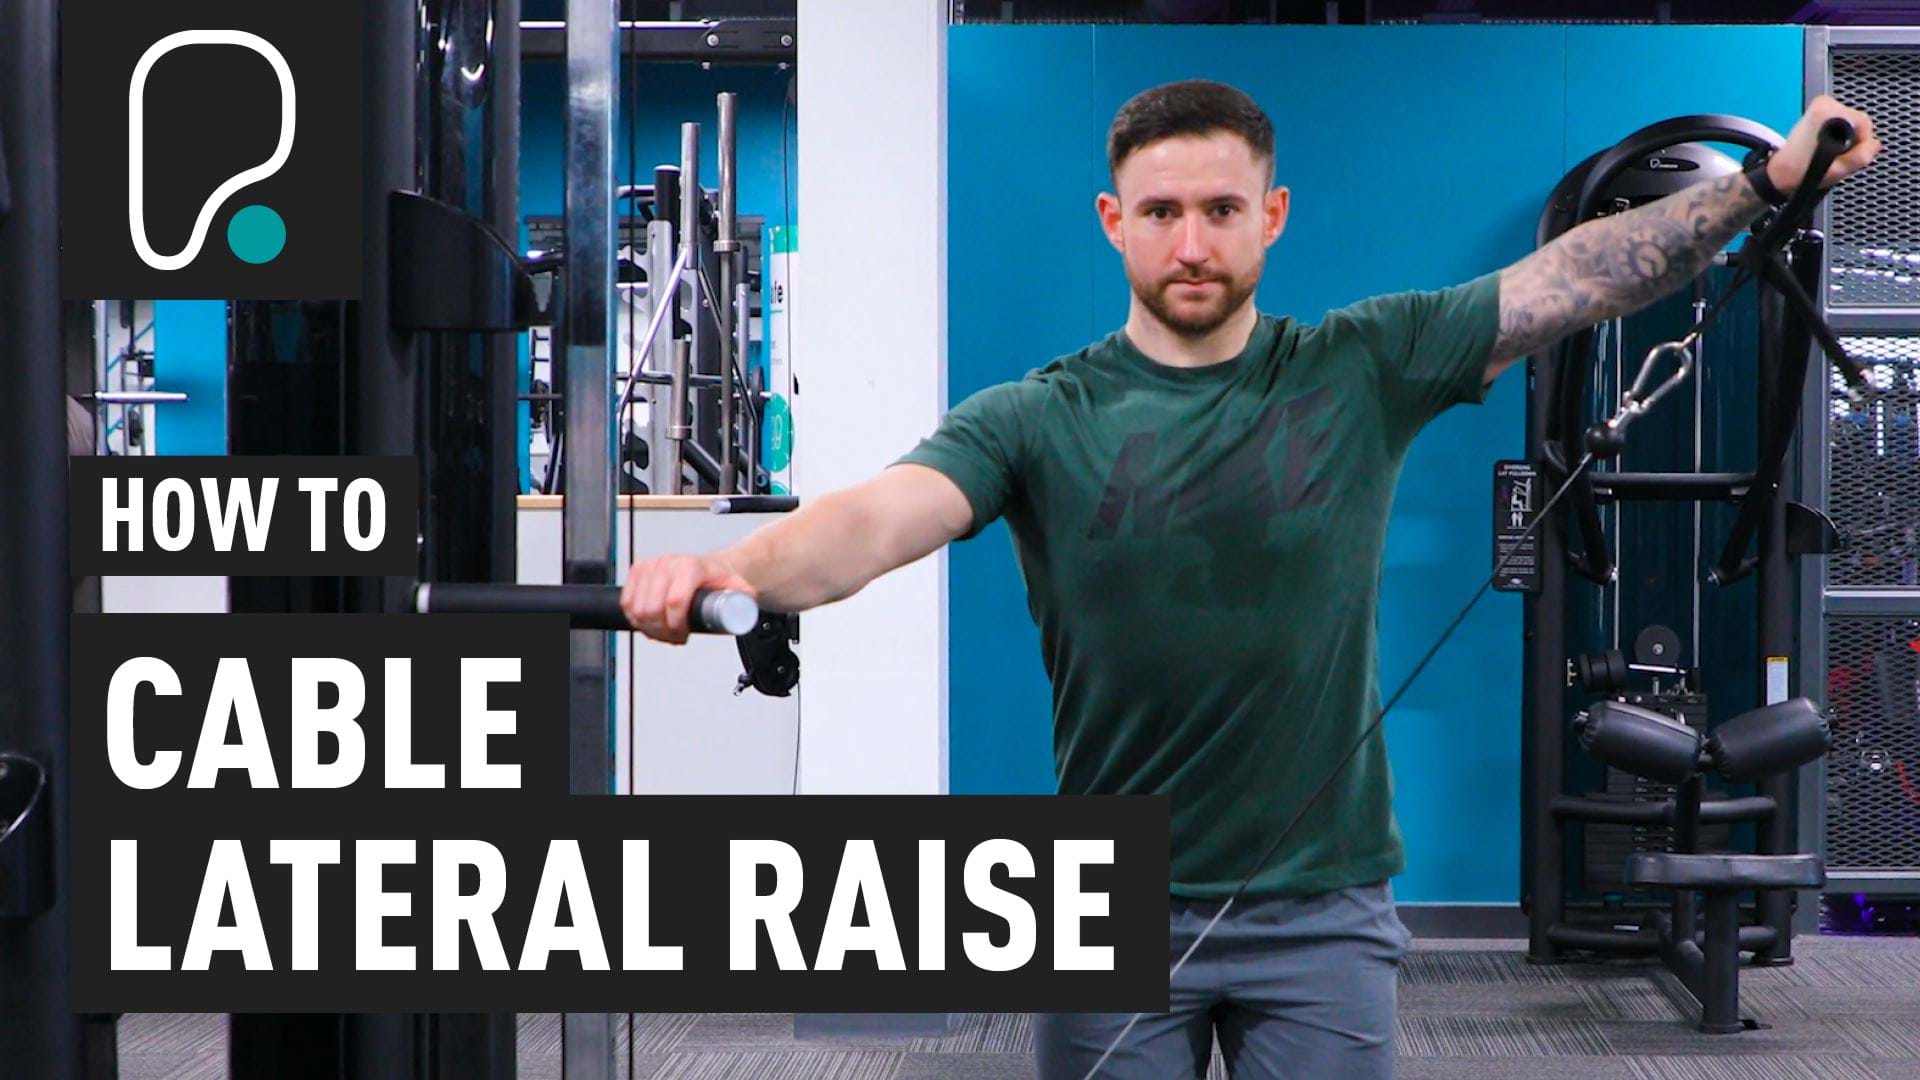 Dumbbell front raise to lateral raise, Exercise Videos & Guides